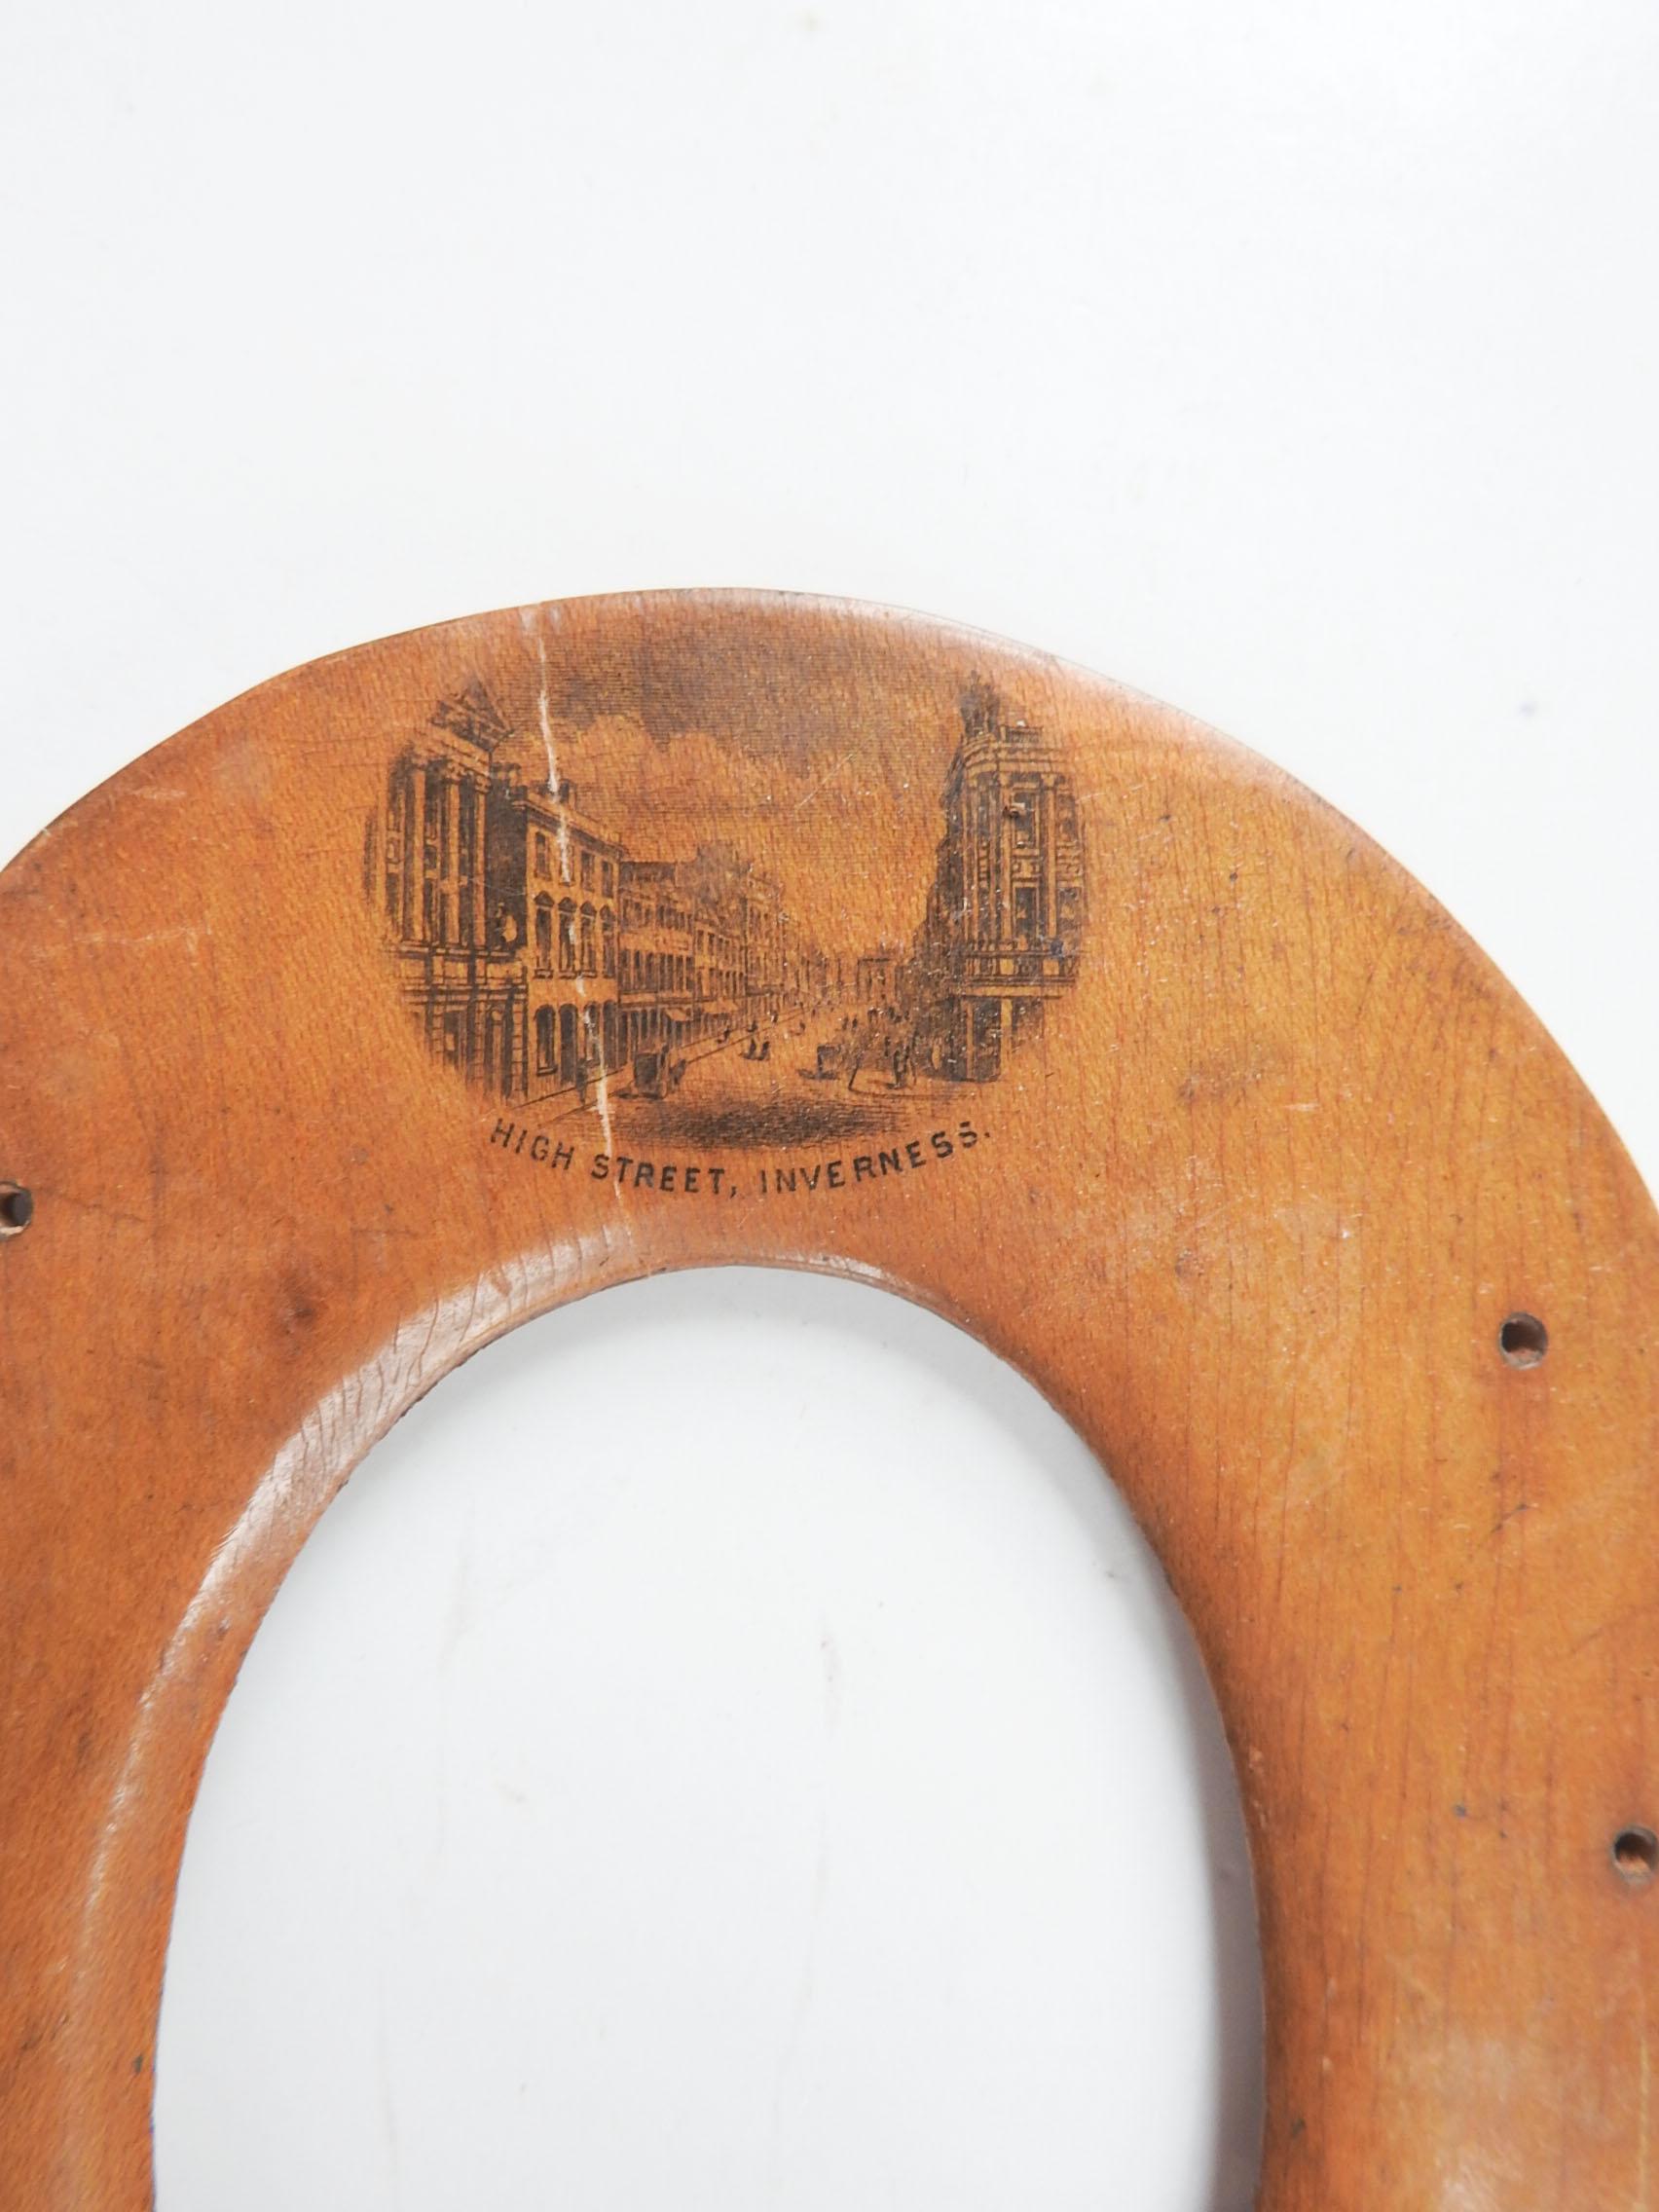 Antique circa 1890's Mauchline or treenware souvenir picture frame. Carved in the shape of a horseshoe with a lithographed pictue of High Street, Inverness Scotland. Very popular with Victorian travelers, opening size 2